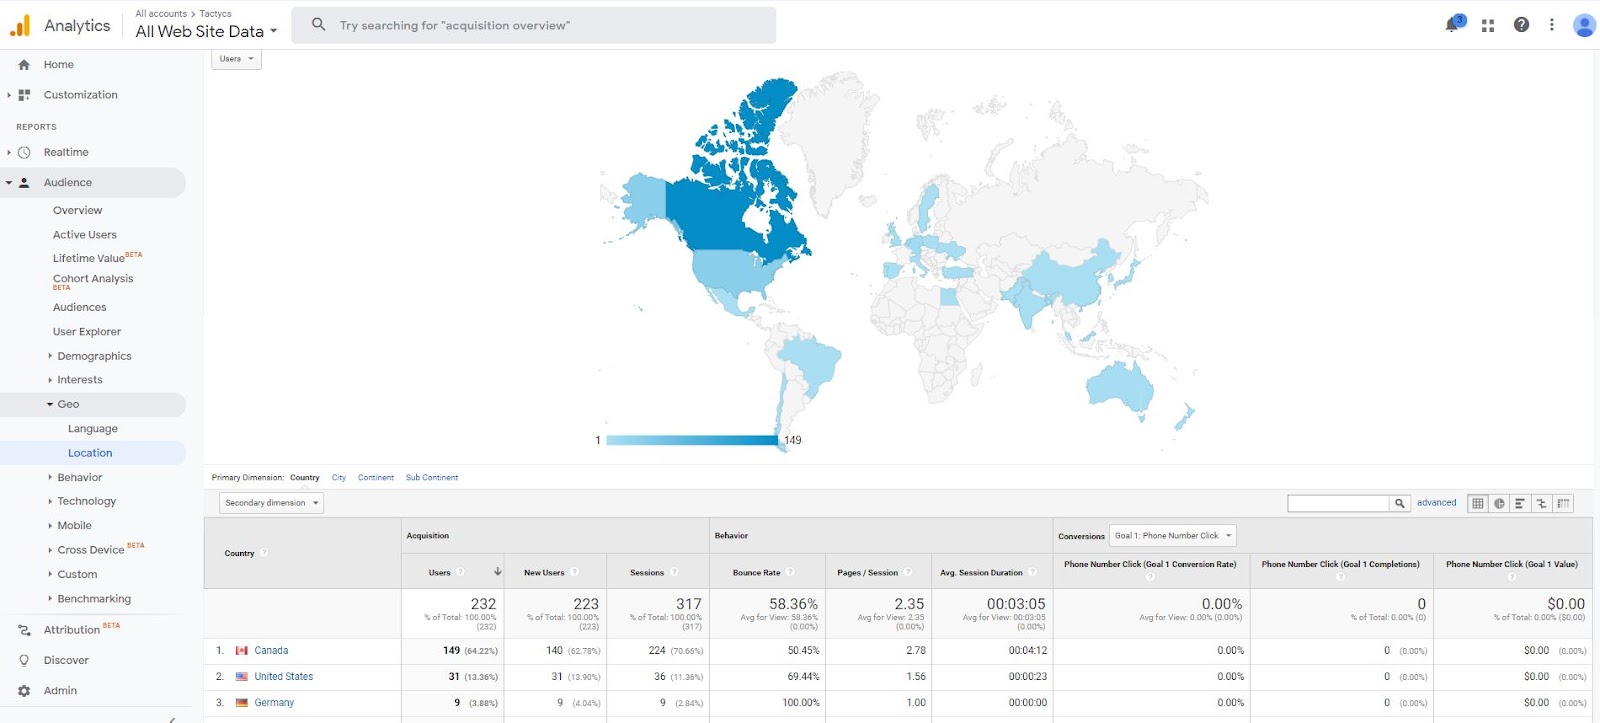 Google Analytics provides a geographic report that allows you to analyze your target market demographic location and language